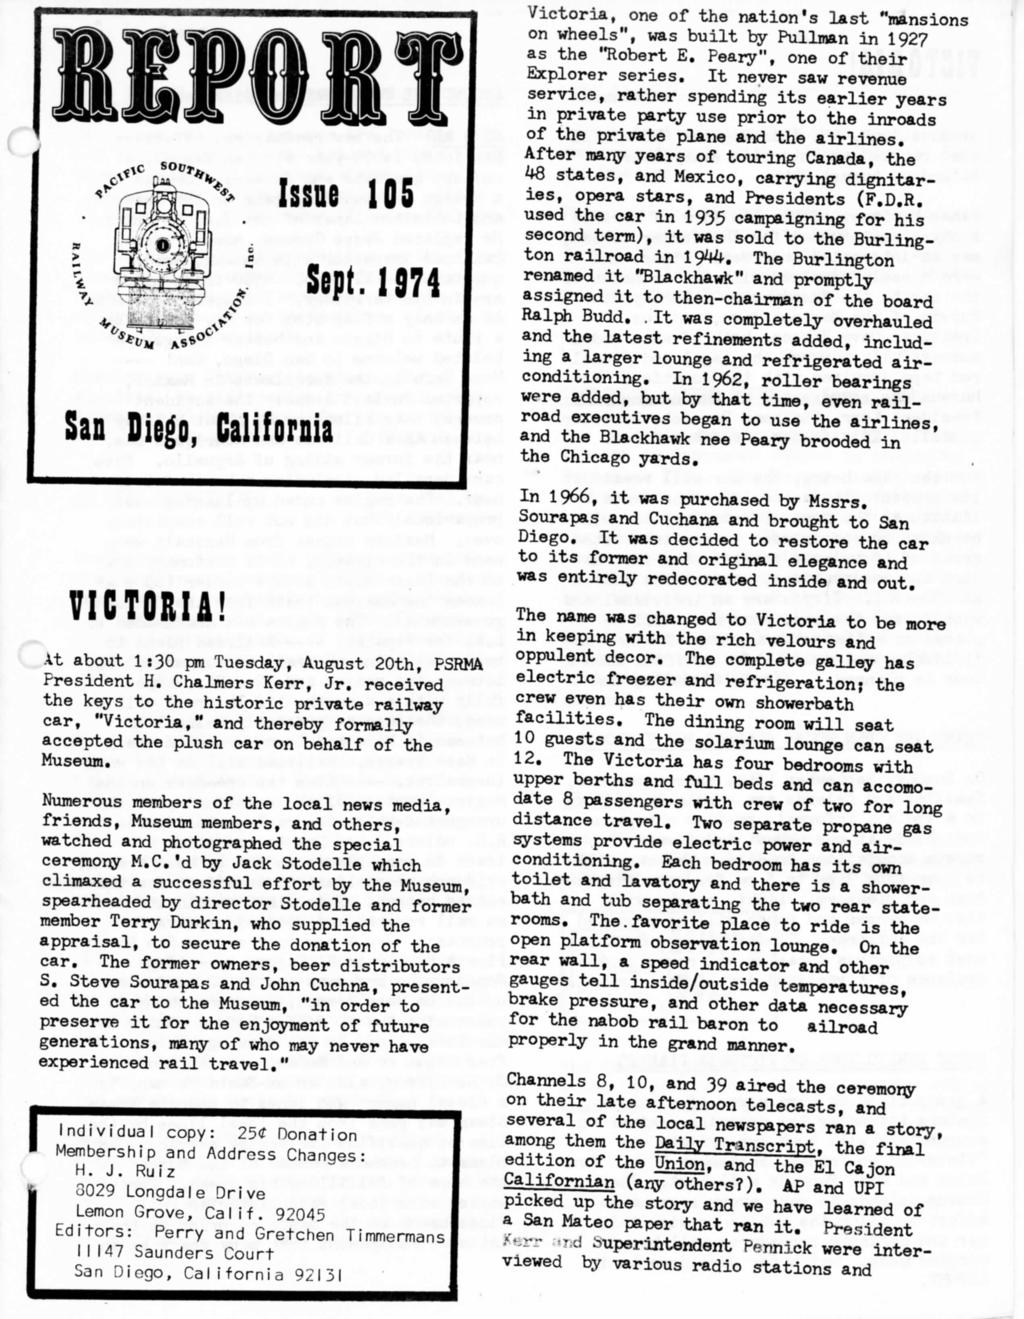 San Diego, California VICTORIA! Issue 105 Sept. 1974 At about 1:30 pm Tuesday, August 20th, PSRMA President H. Chalmers Kerr, Jr.